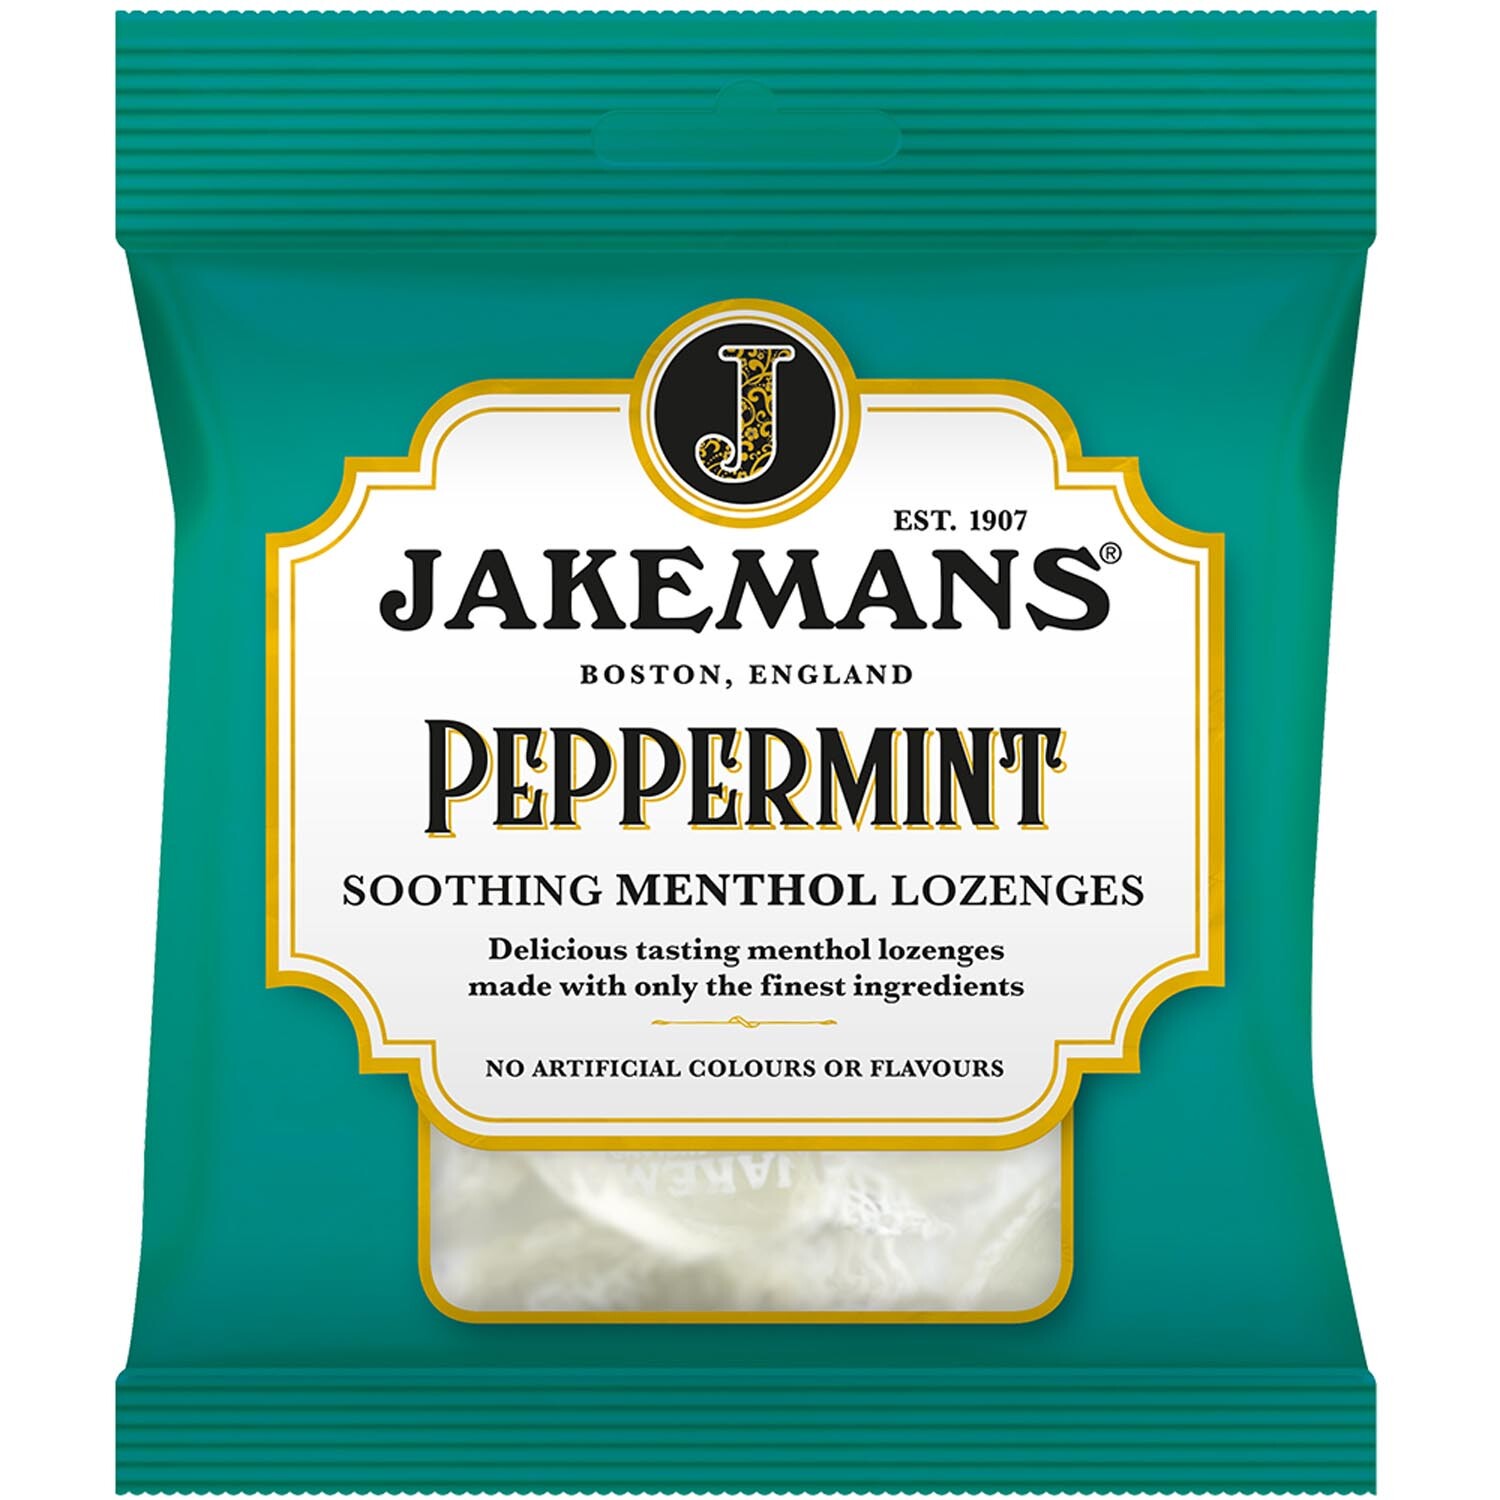 Soothing Menthol Lozenges - Peppermint Image